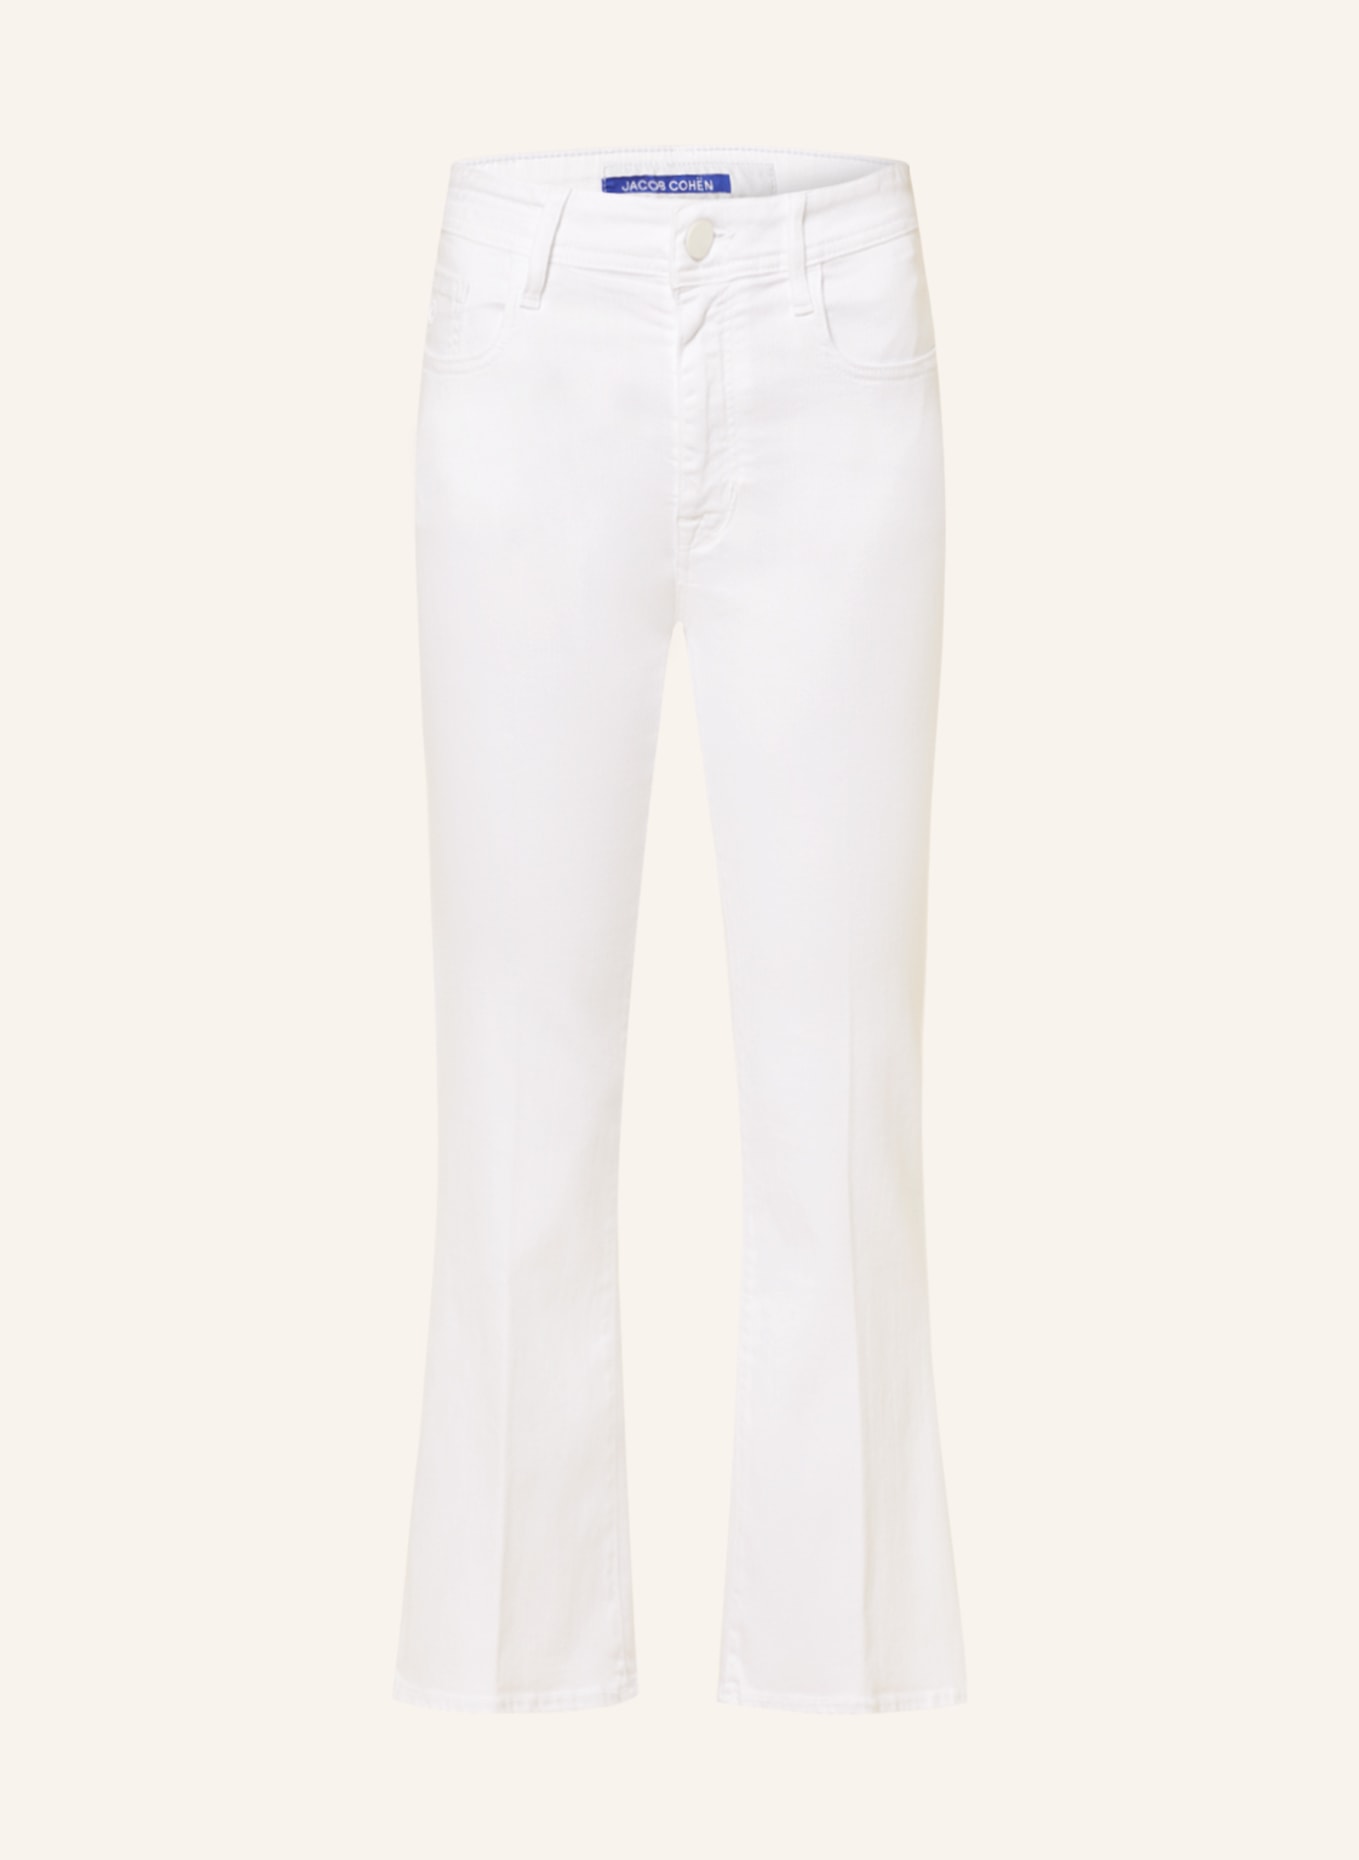 JACOB COHEN Flared Jeans VICTORIA, Farbe: WEISS (Bild 1)